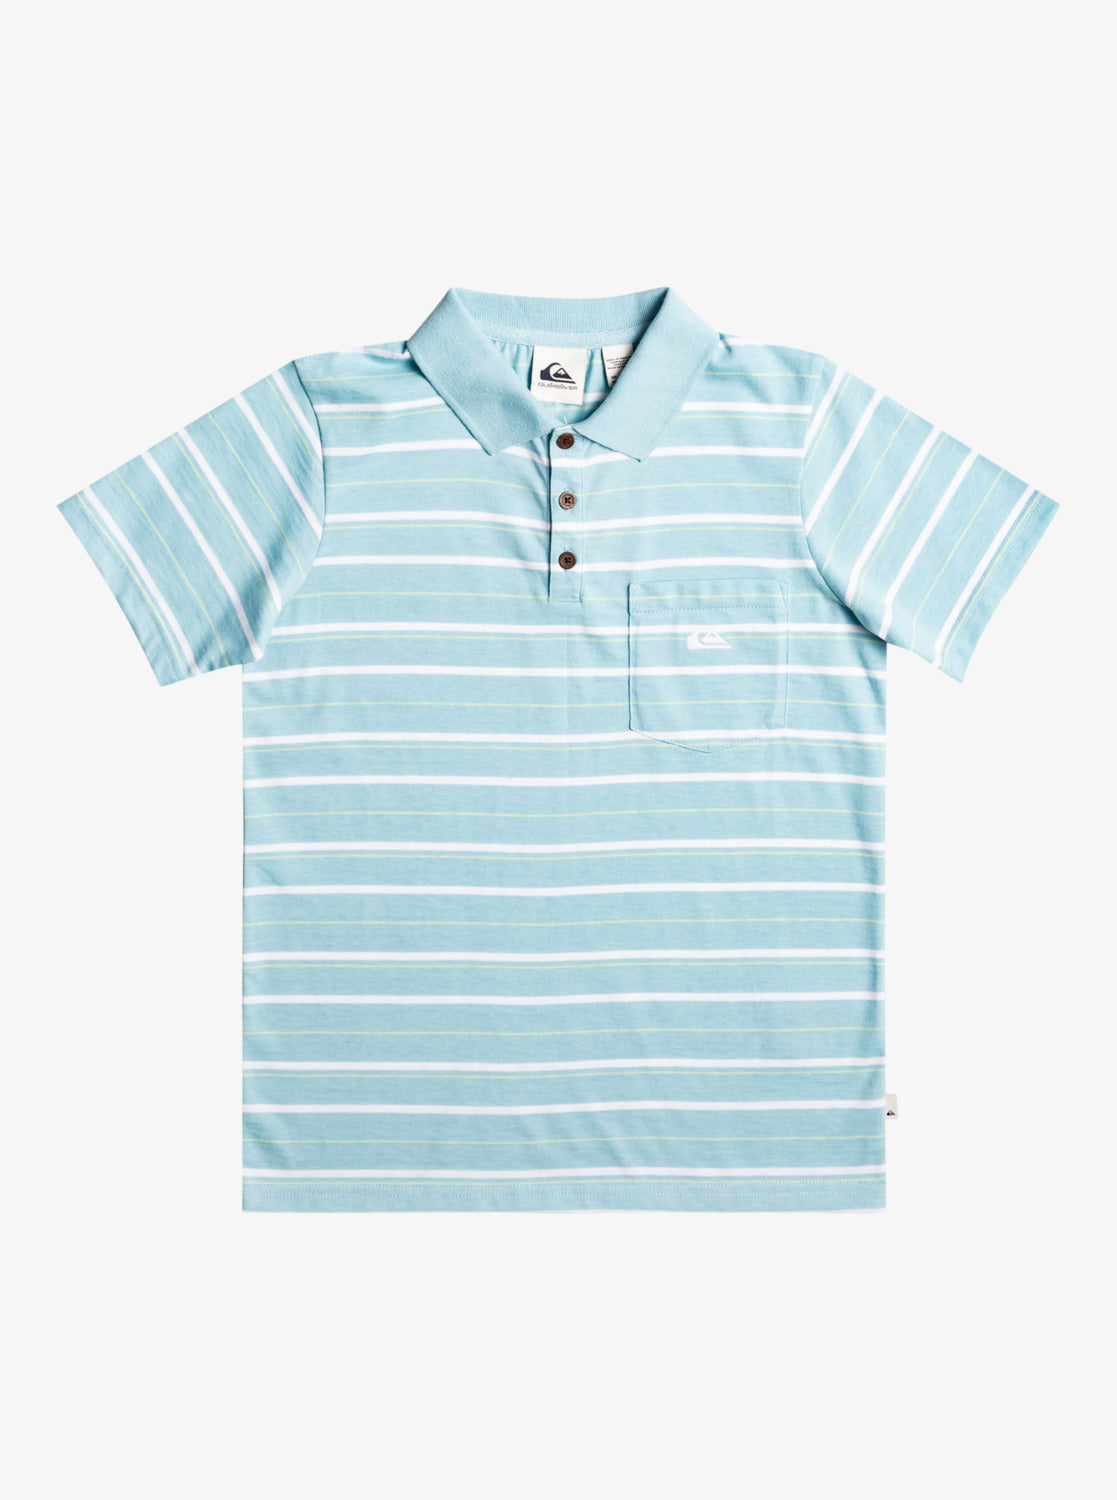 New Polo SS Youth